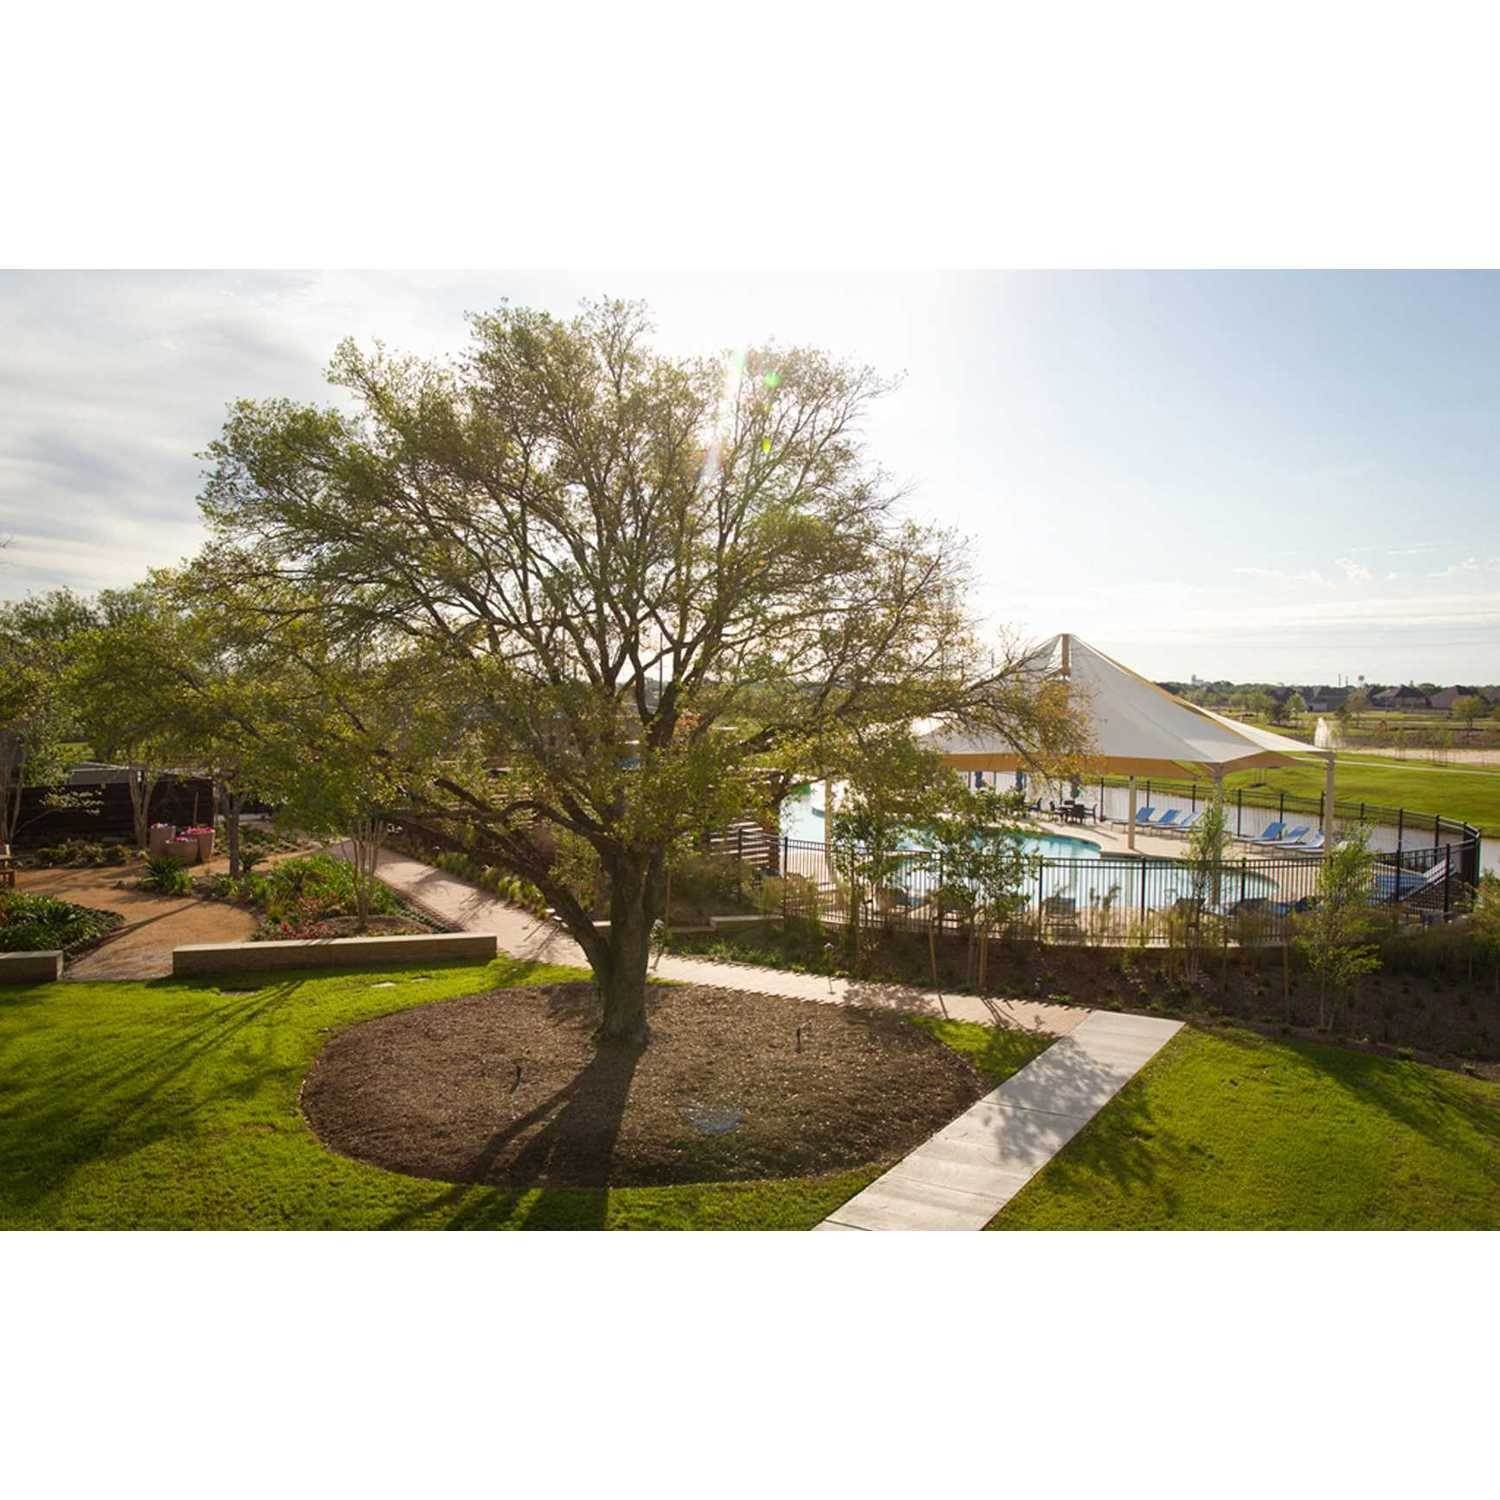 13. Cane Island 65ft. lots building at 1903 Kessler Point Place, Katy, TX 77493